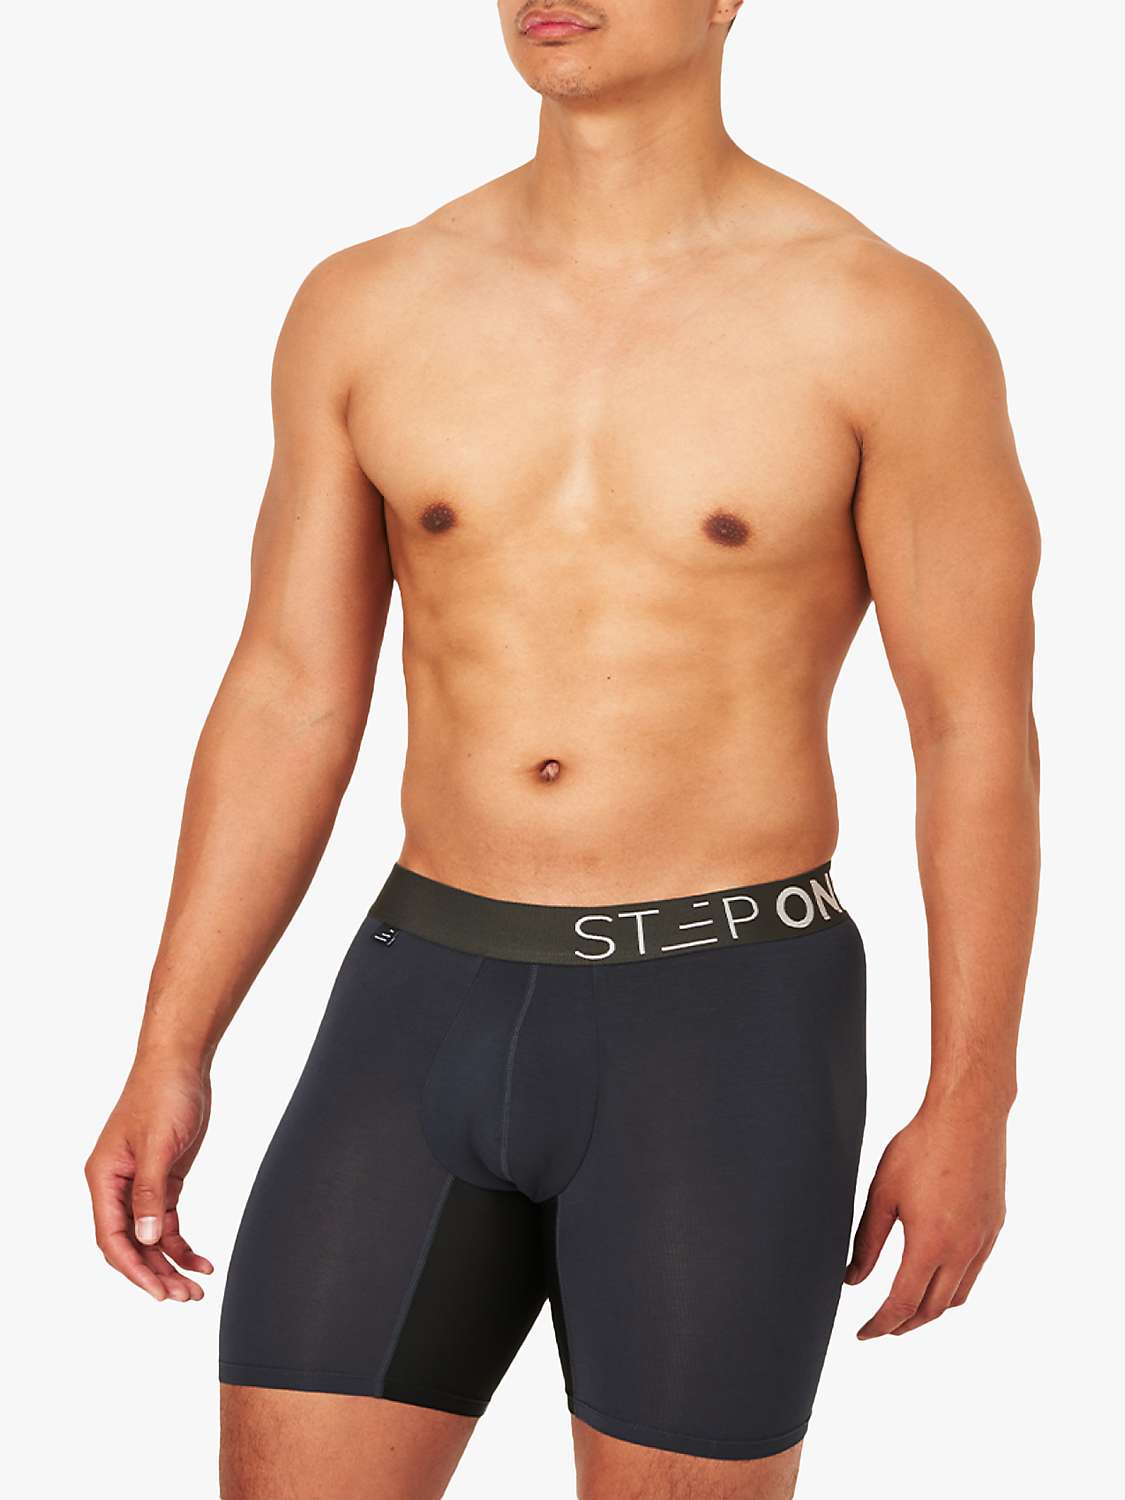 Buy Step One Bamboo Trunks, Pack of 3 Online at johnlewis.com